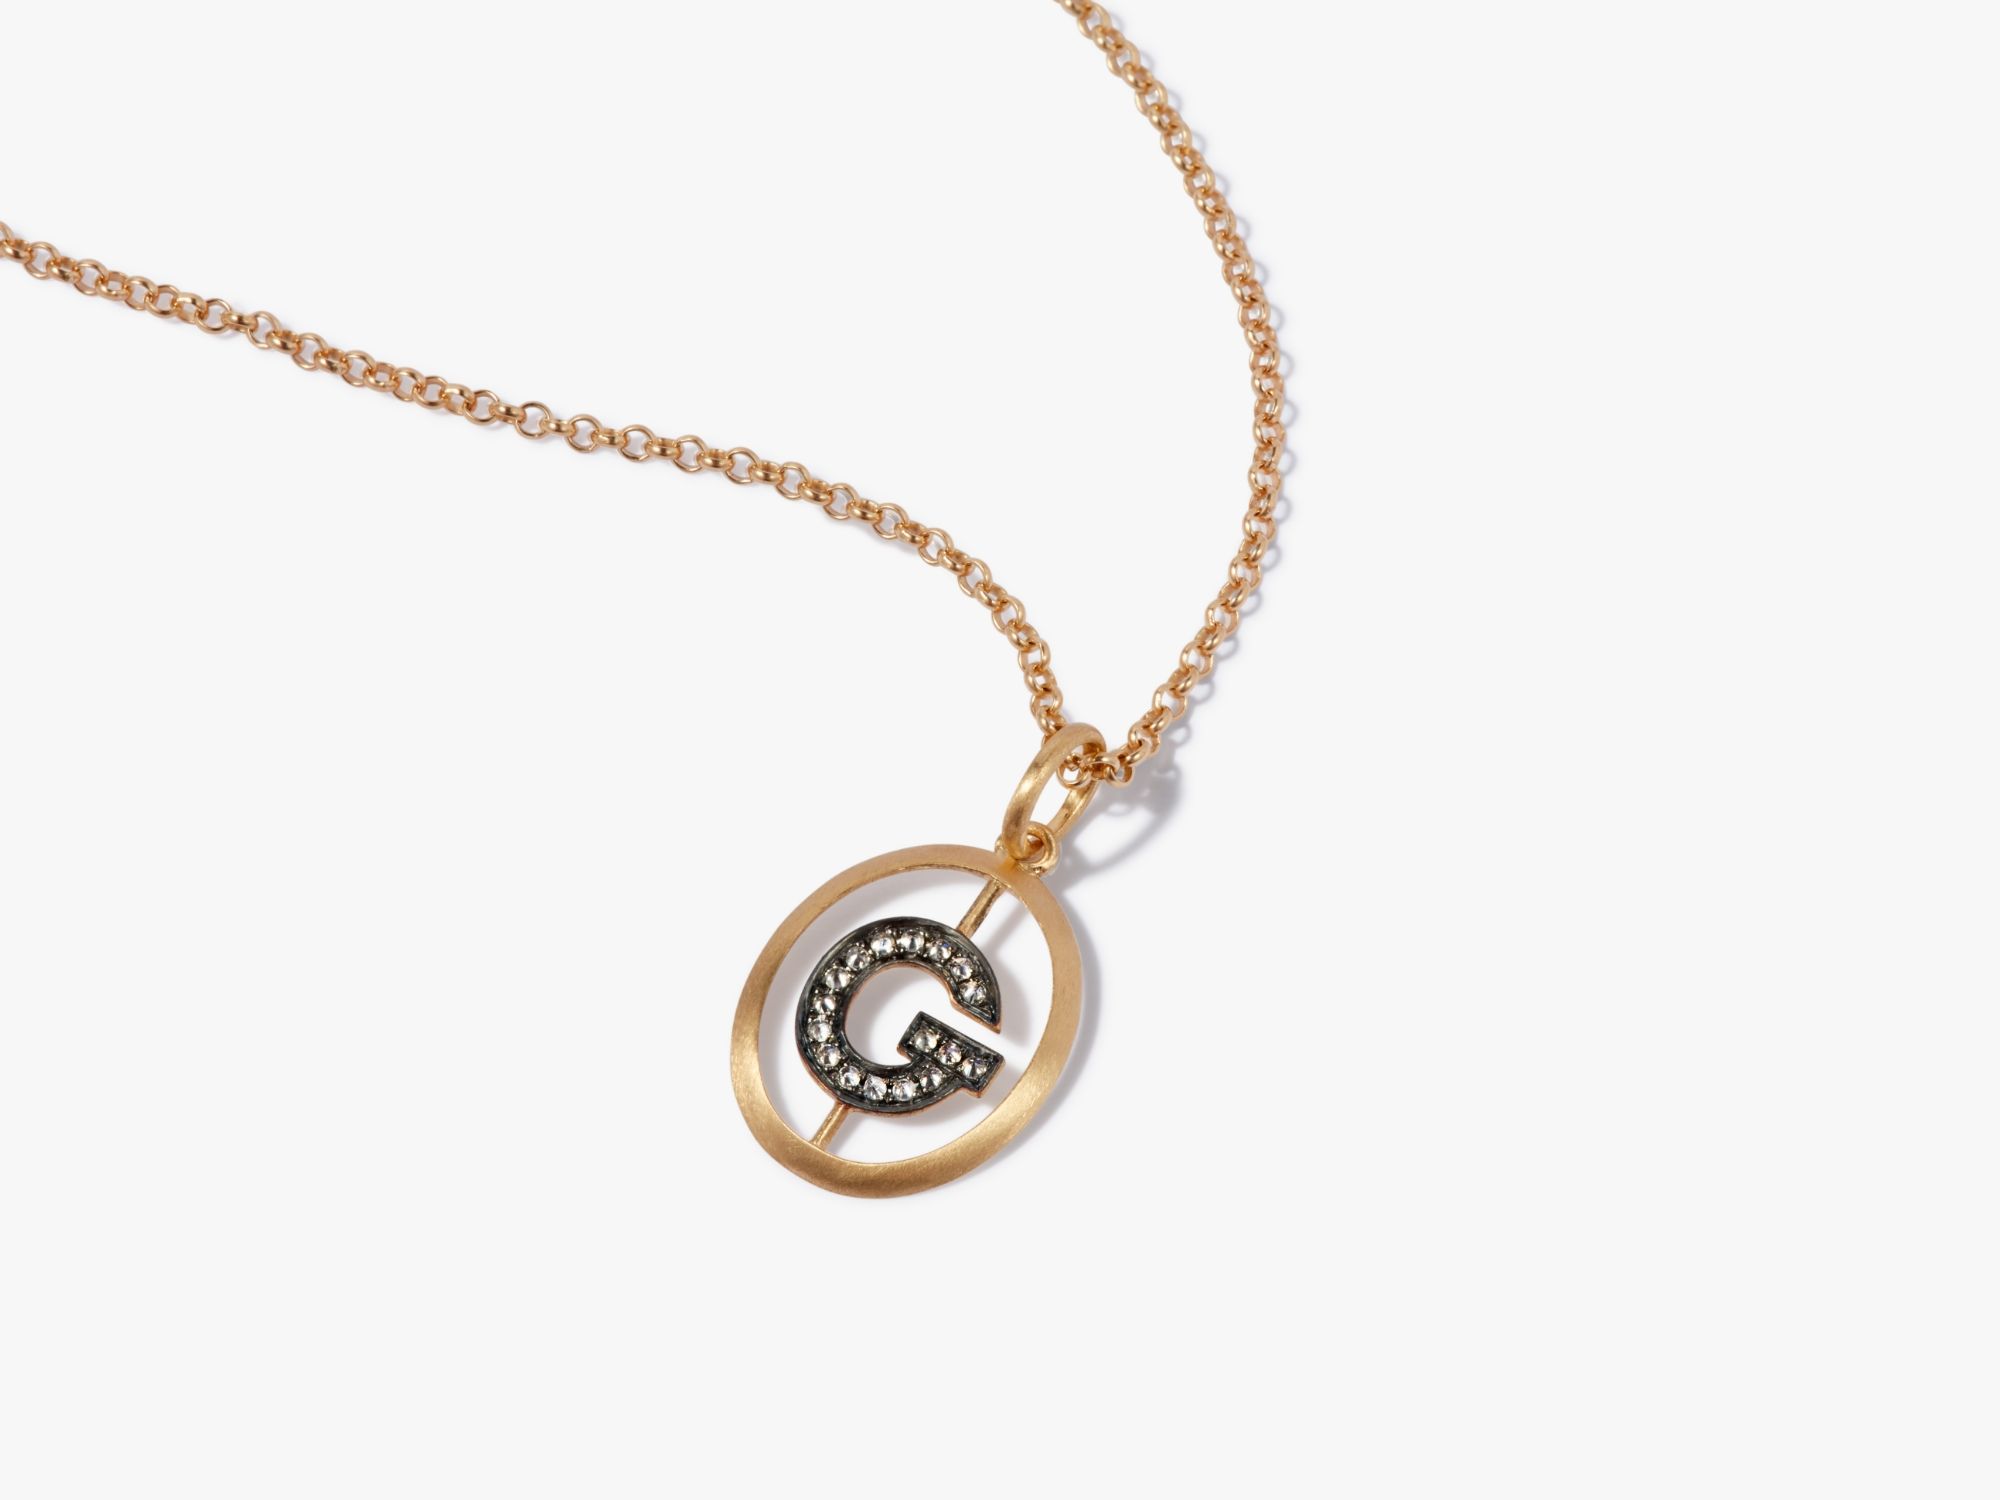 Initial G Necklace